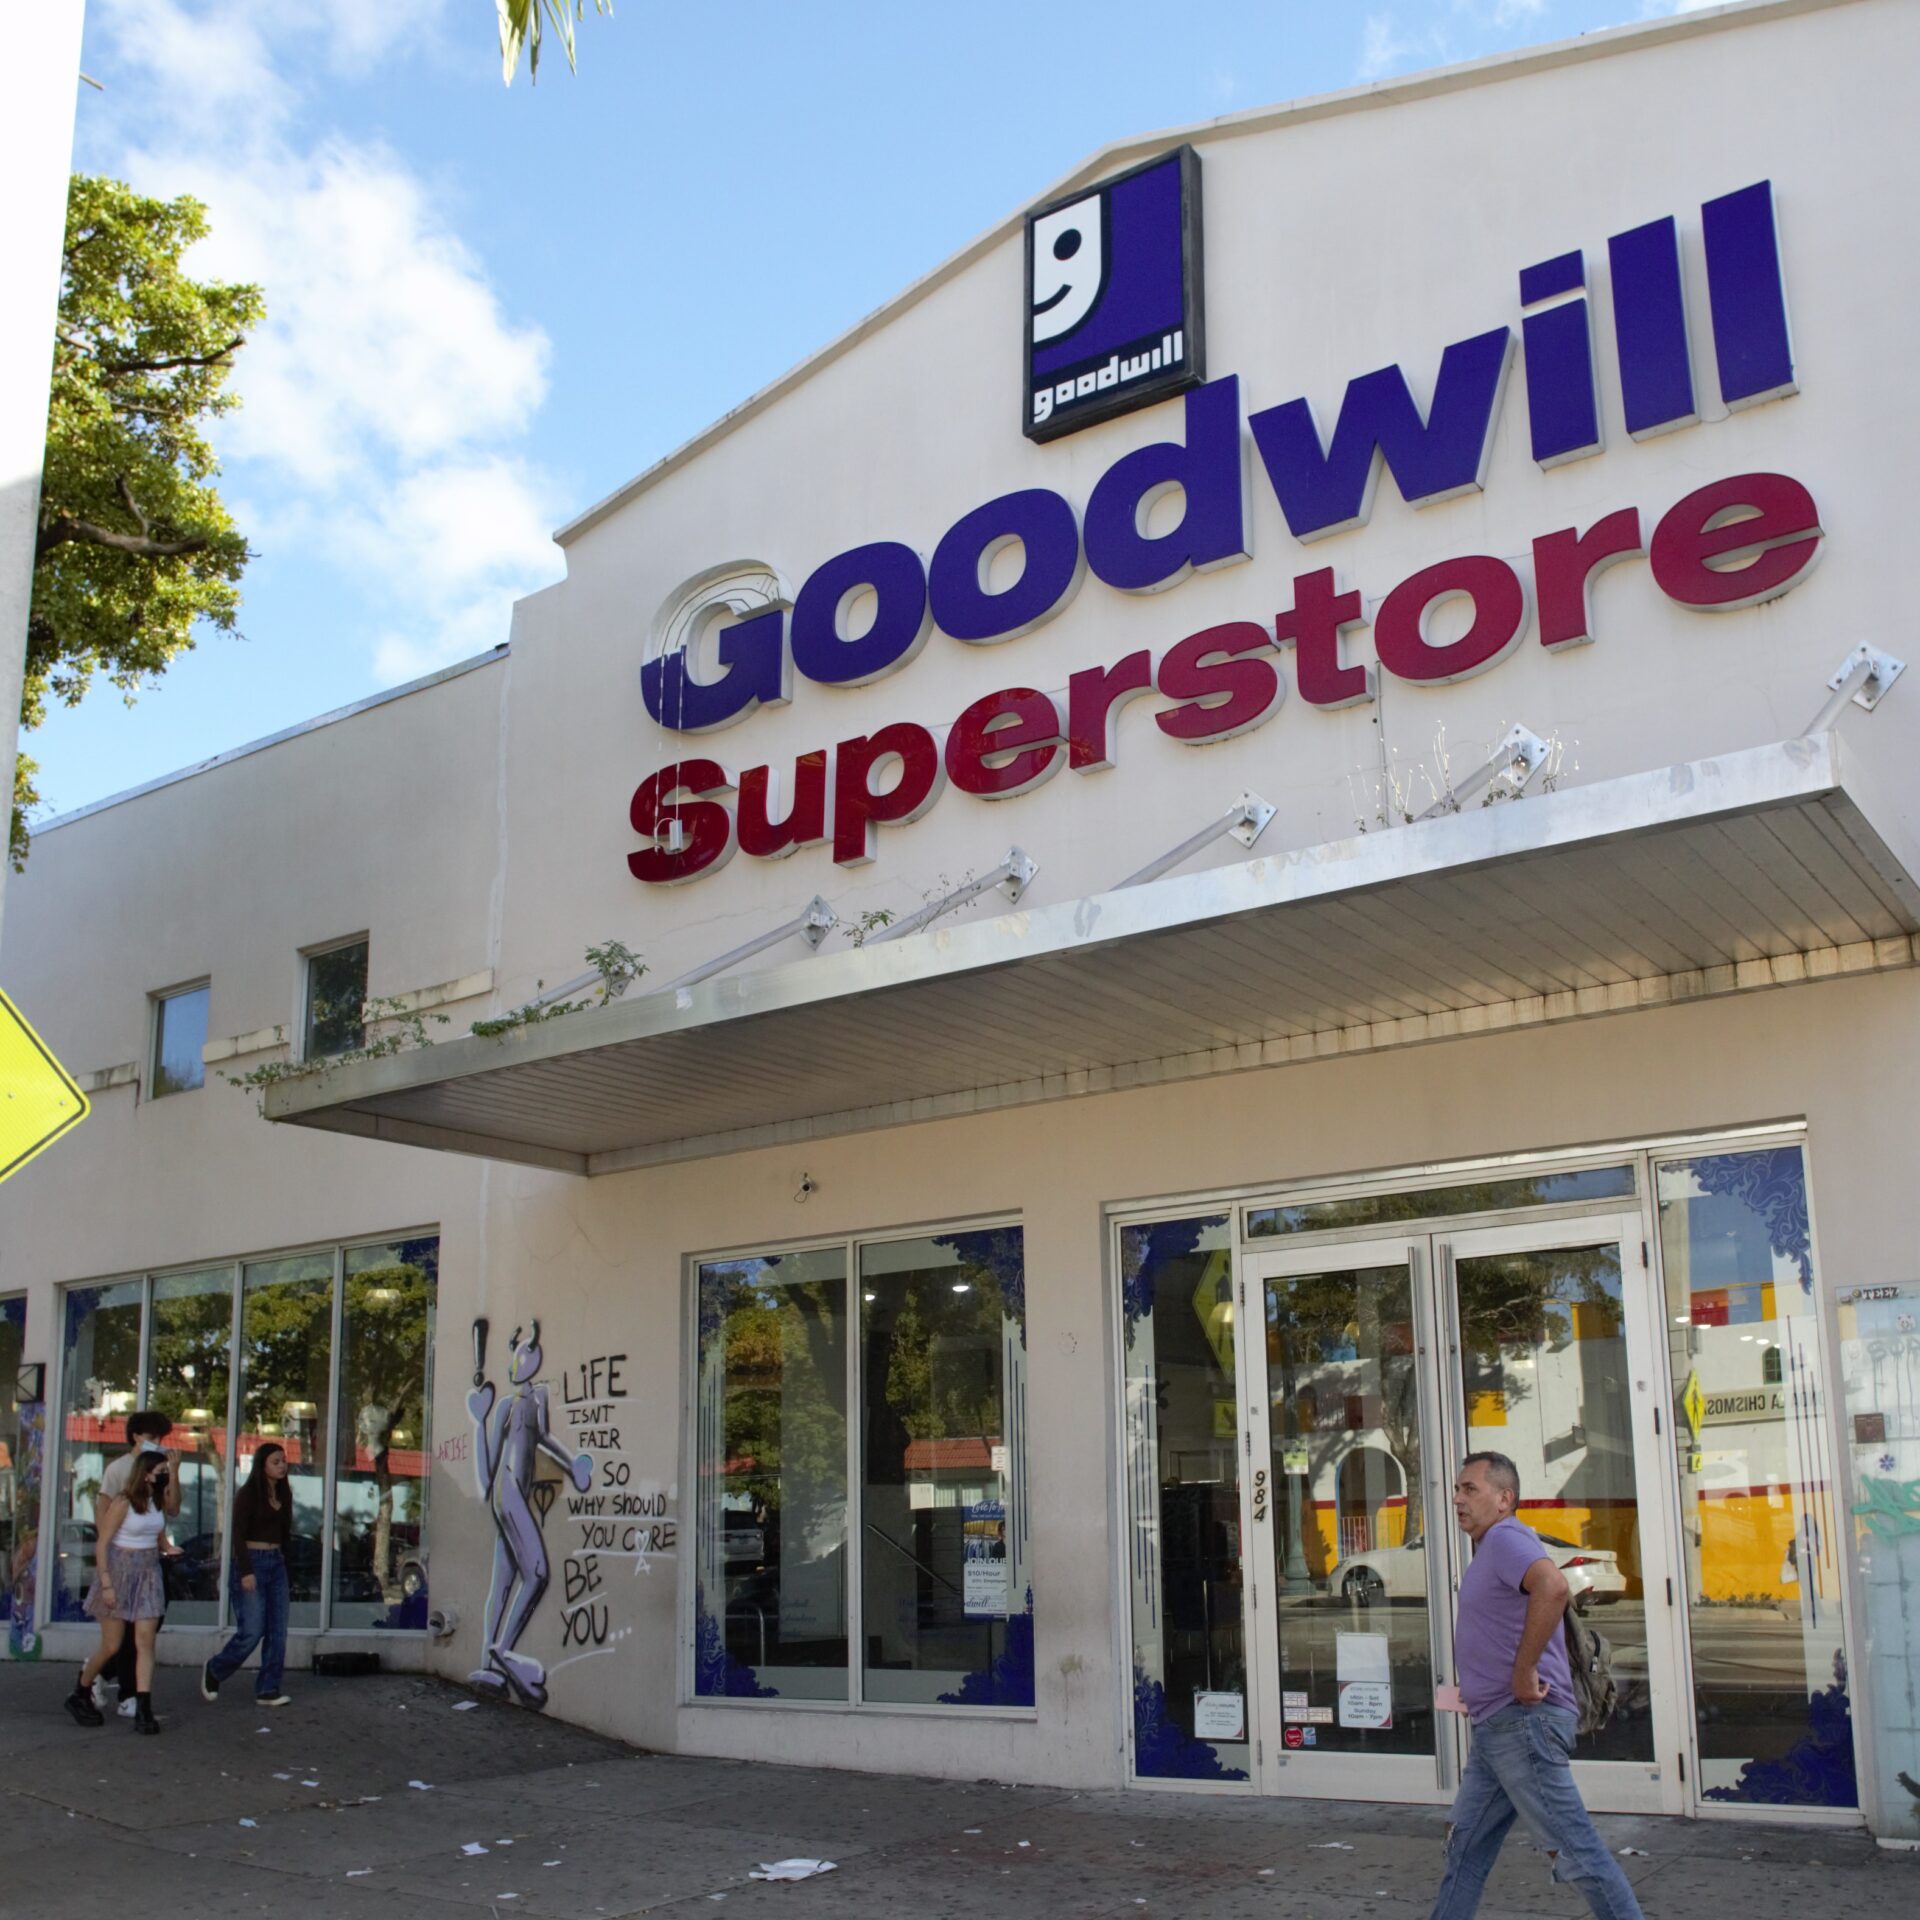 Goodwill Superstore signboard logo and lettering on the façade of a building